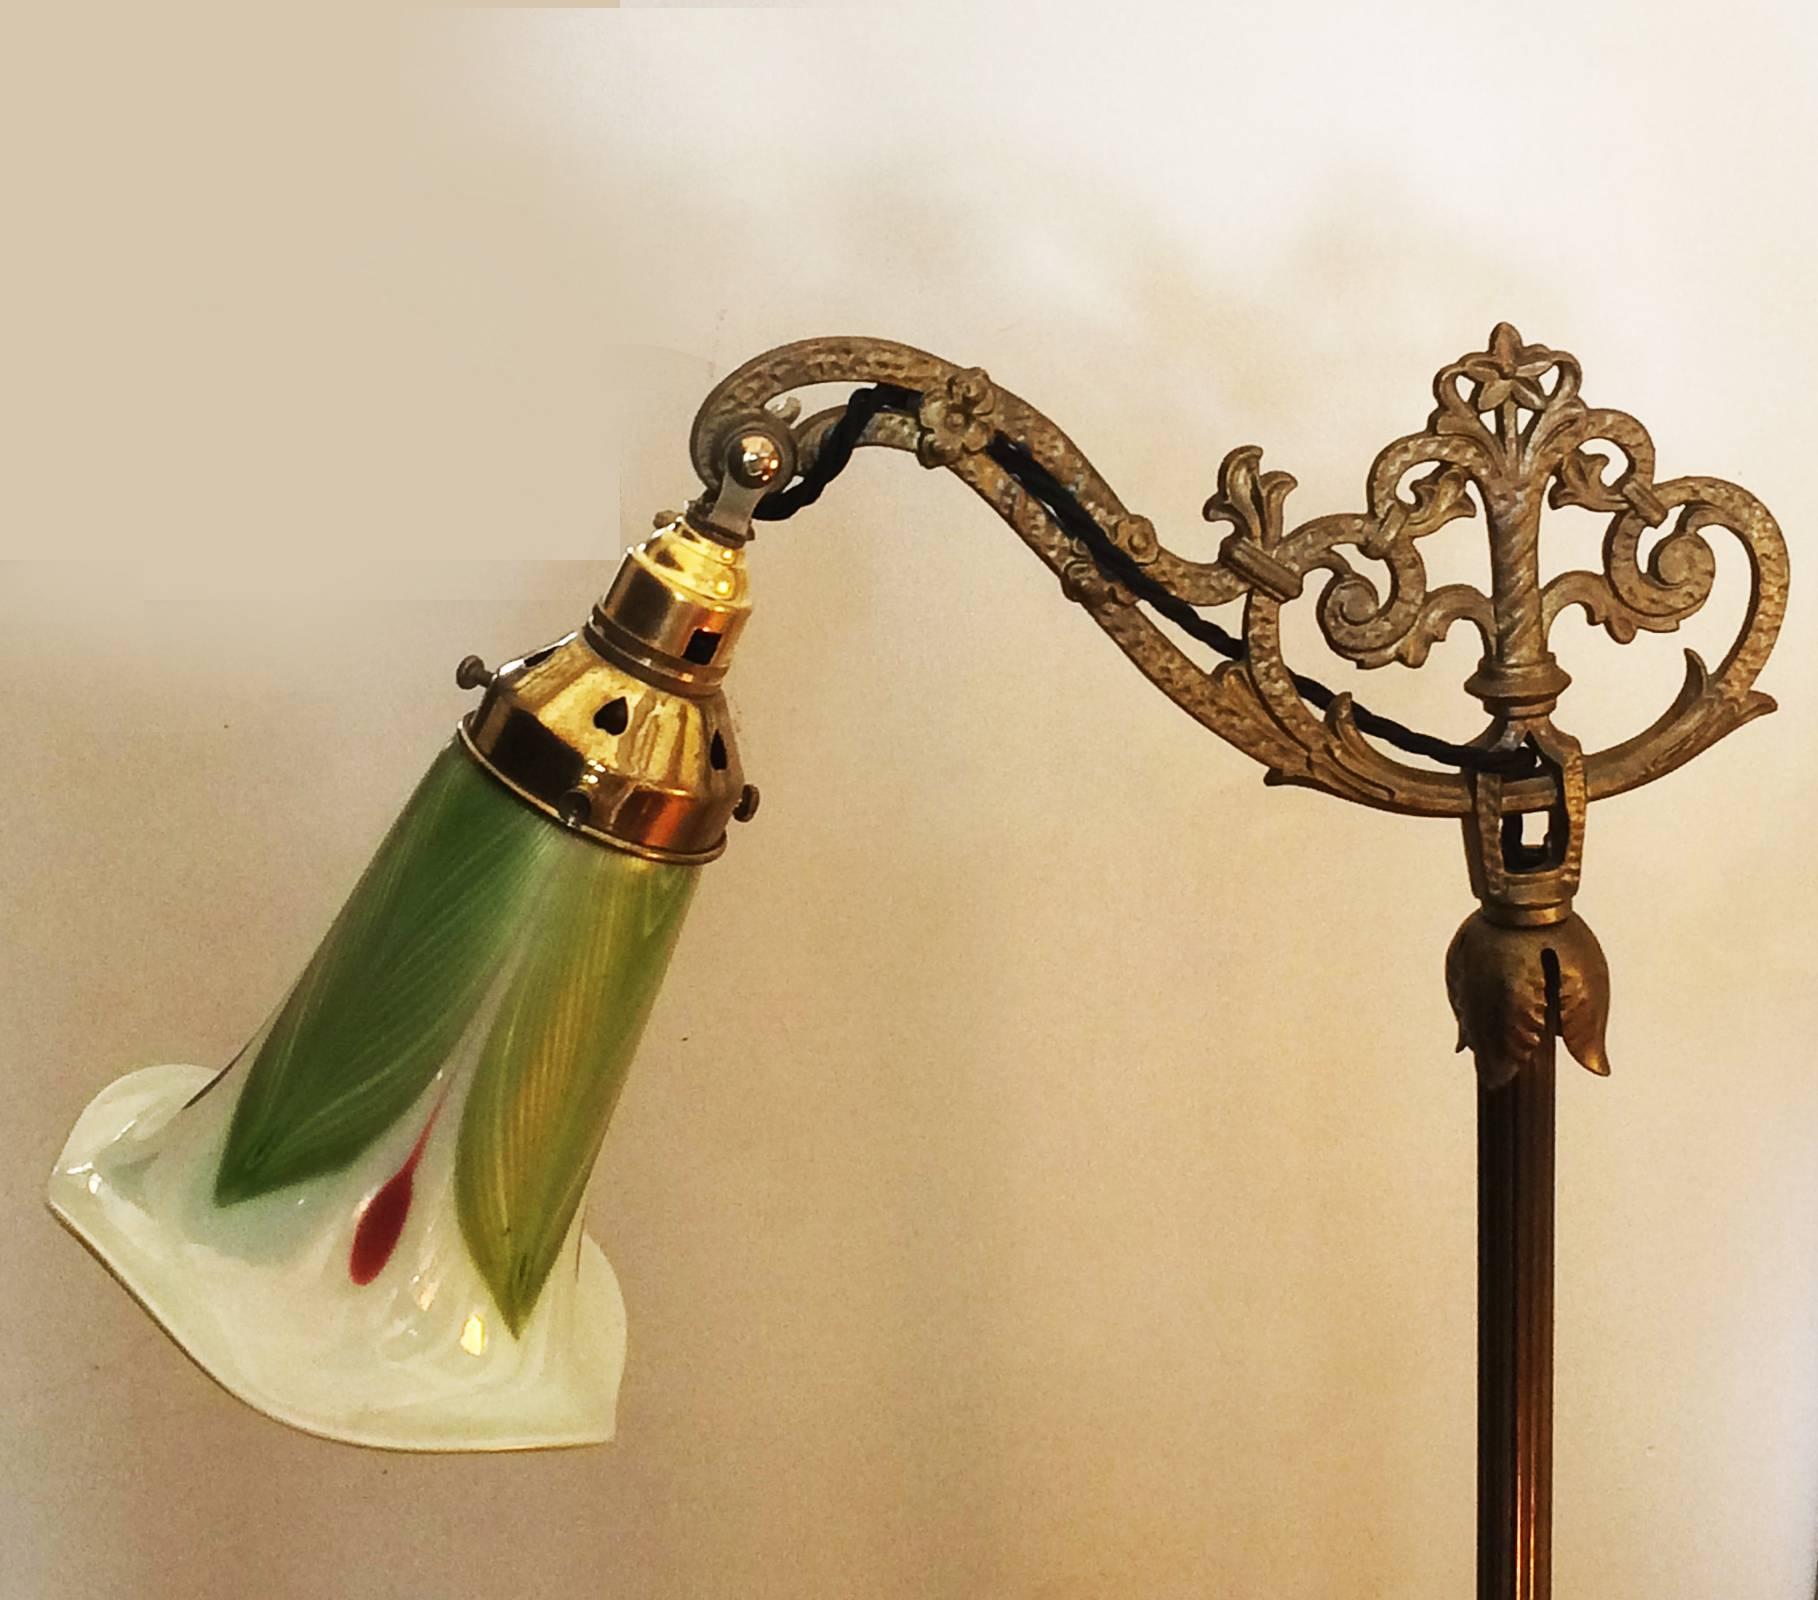 Early 20th Century Art Nouveau American Bridge Floor Standard Lamp with Pulled Feather Shade